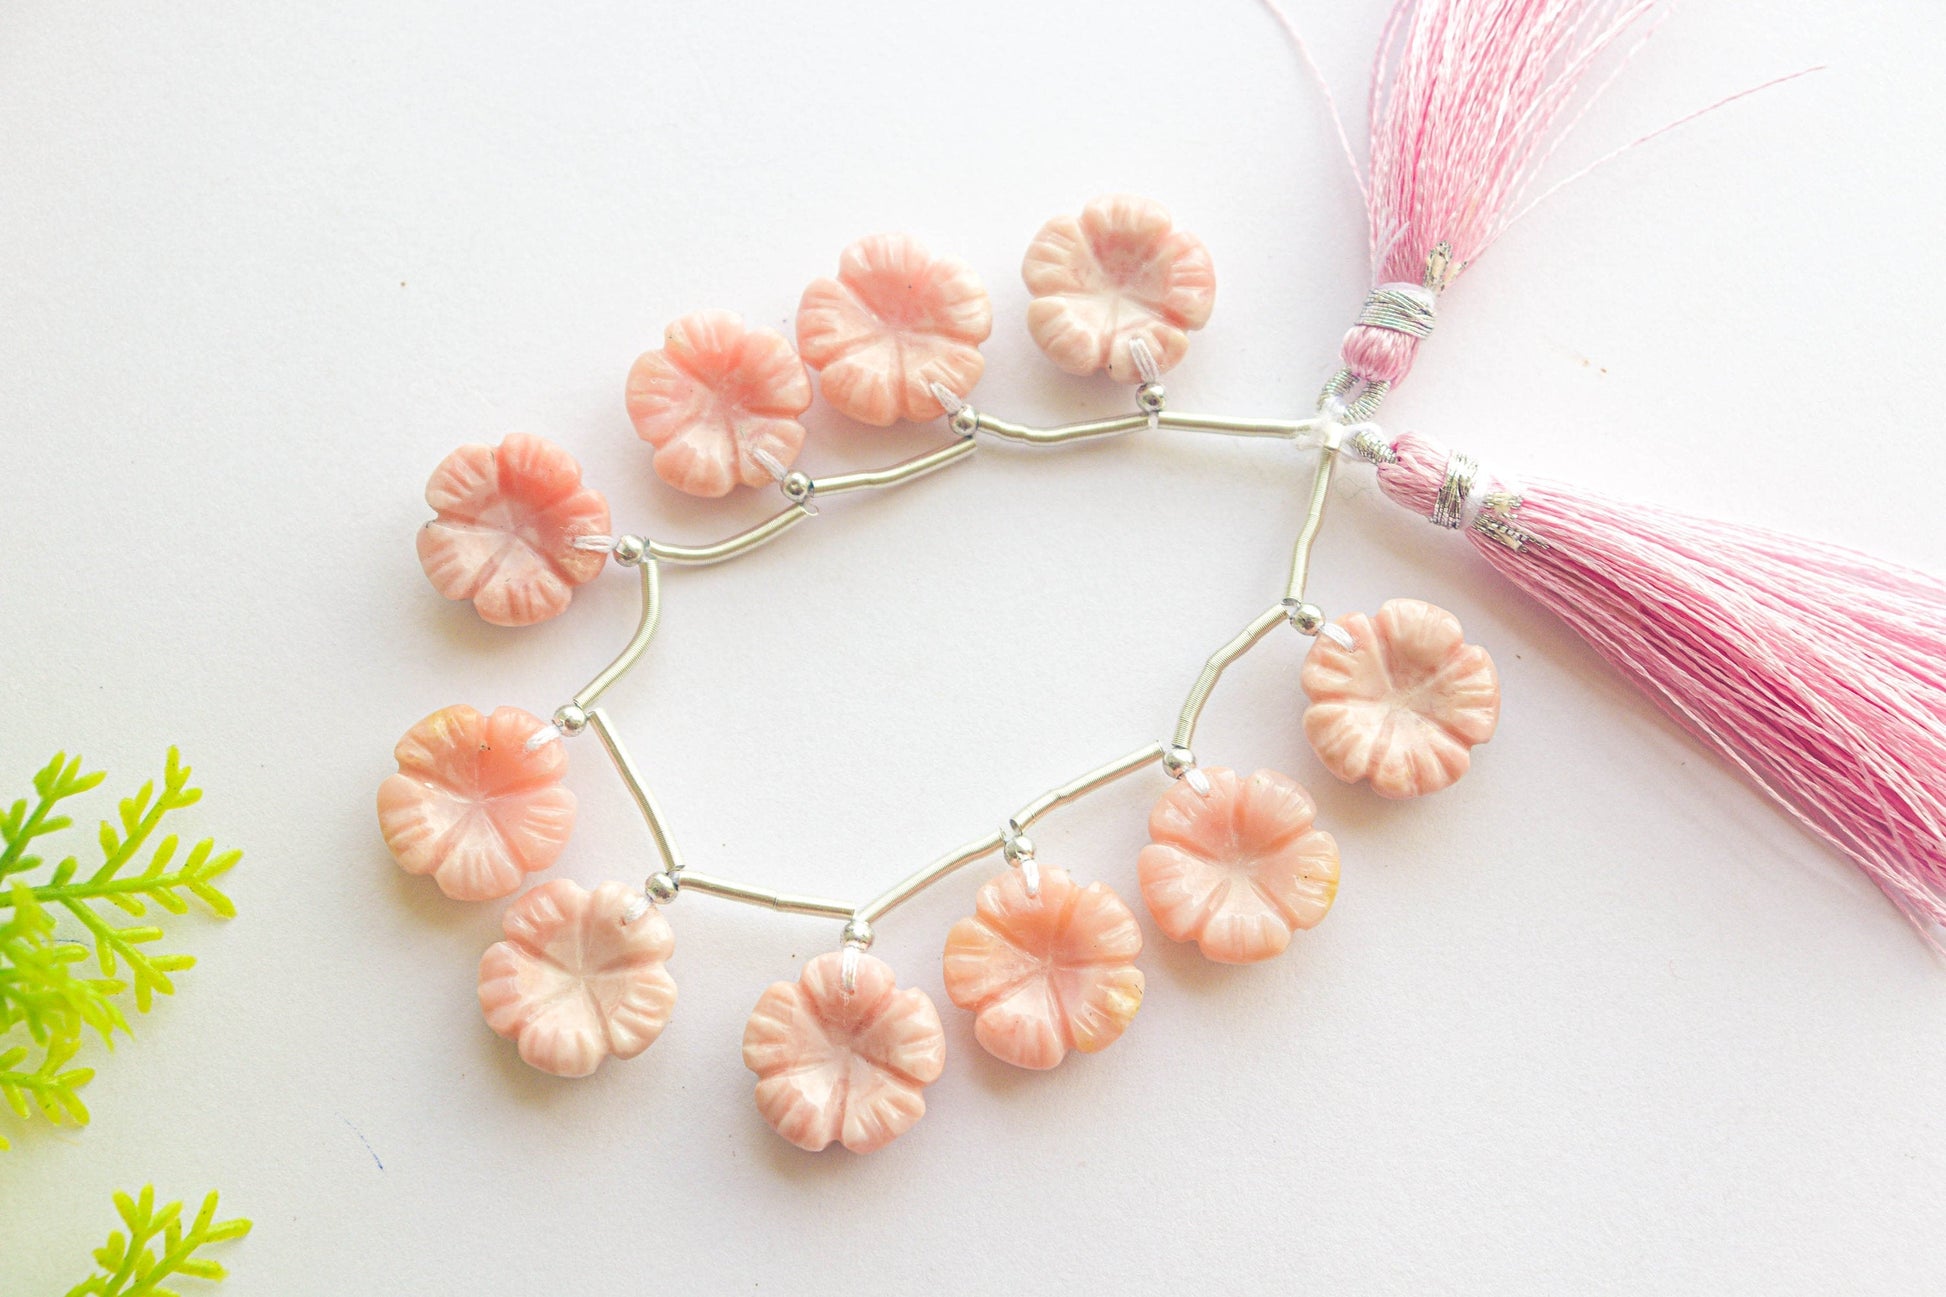 Natural Pink Opal Flower Carving  Beads | 15x15mm | 10 Pieces | Natural Gemstone | Beadsforyourjewellery BFYJ1173-3 Beadsforyourjewelry